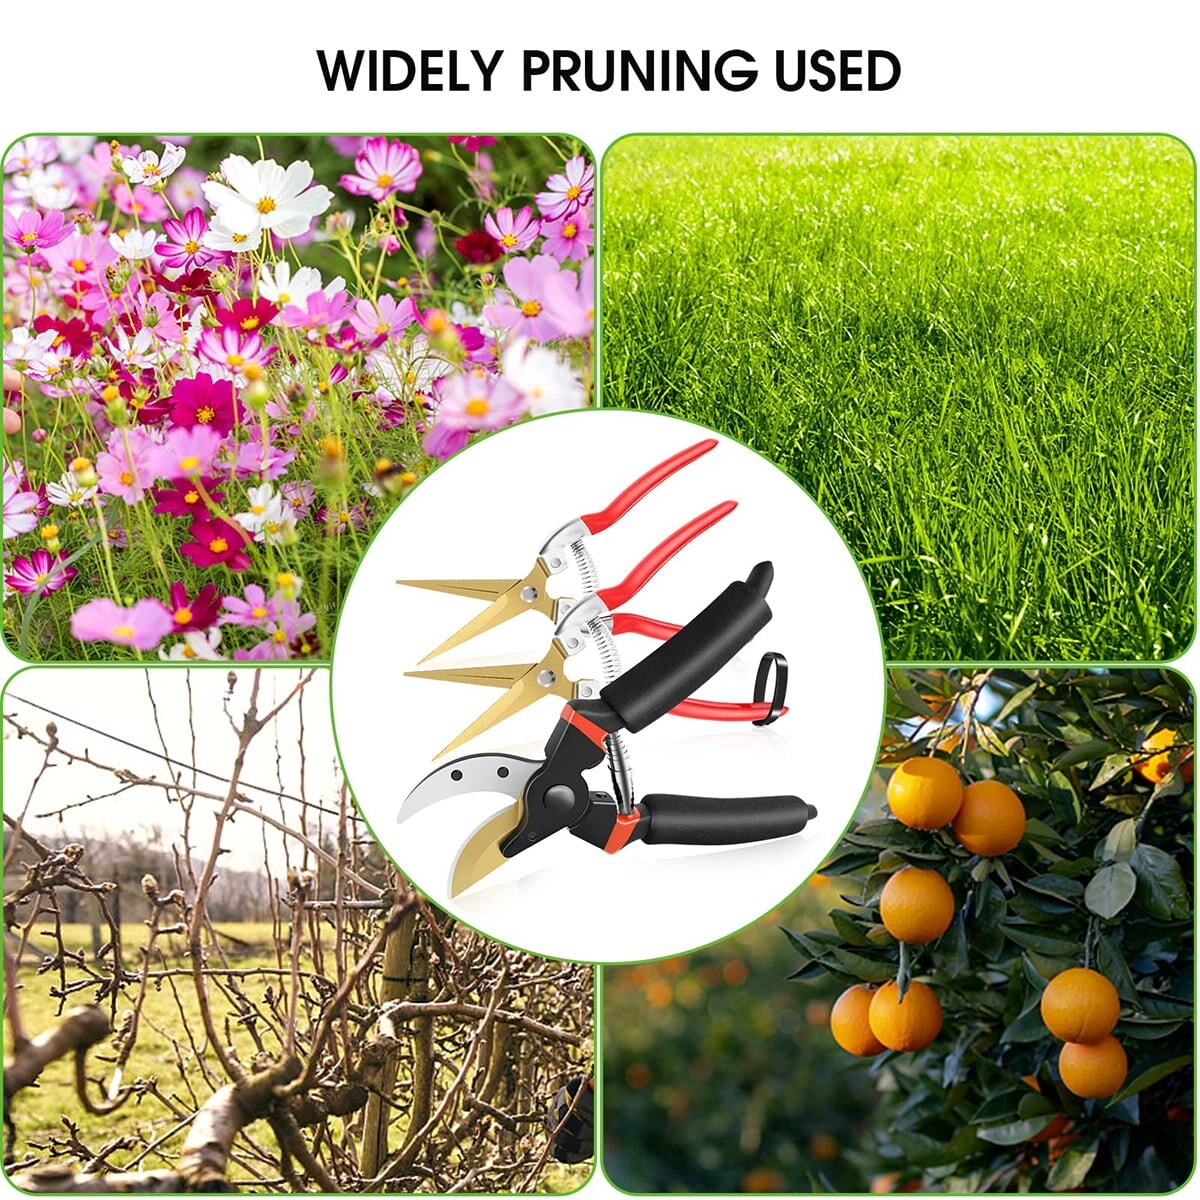 https://ak1.ostkcdn.com/images/products/is/images/direct/a847a918f05396f7f33df37795bfc25971f15a9e/3-Pack-Garden-Pruning-Shears-Stainless-Steel-Blades-Handheld-Pruners.jpg